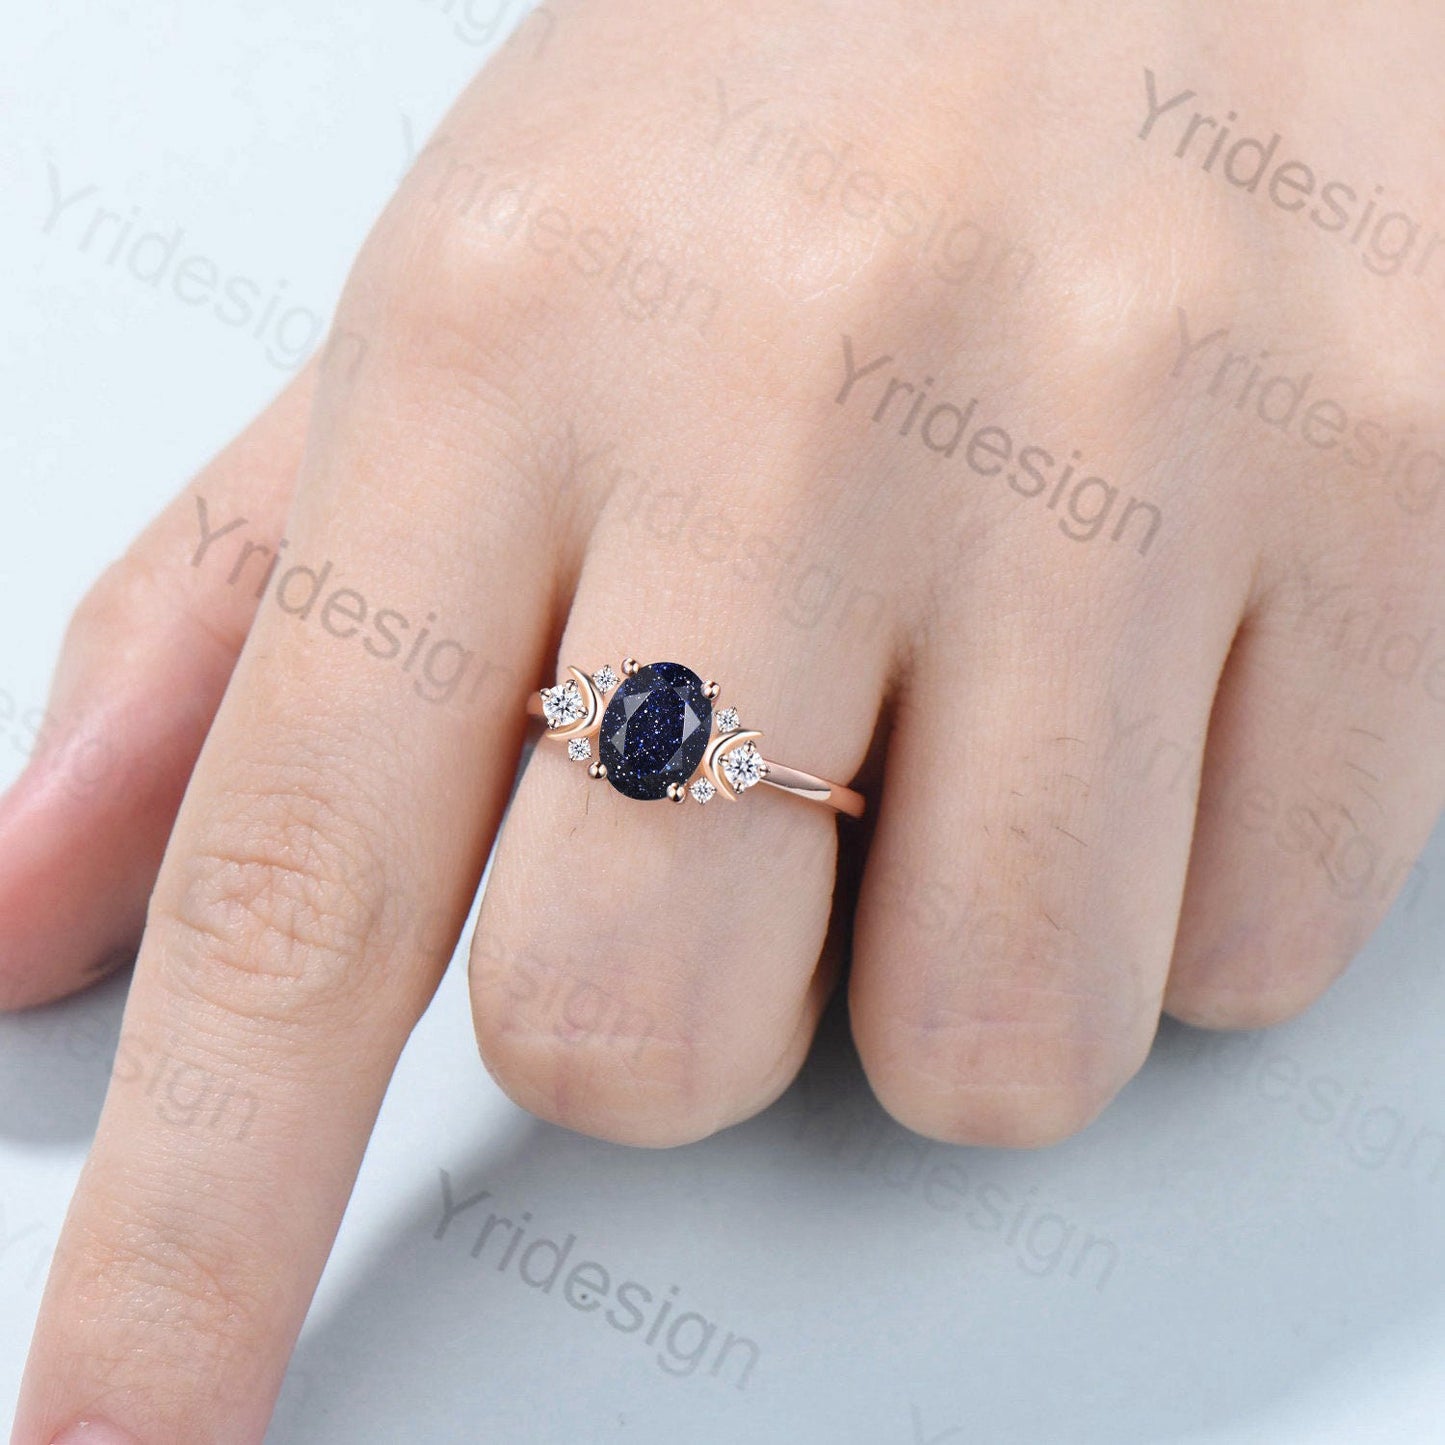 Vintage Moon Blue Sandstone Ring Unique 1.5Ct Oval Galaxy Engagement Ring Wedding Ring For Women Unique Handmade Proposal Gifts for Women - PENFINE